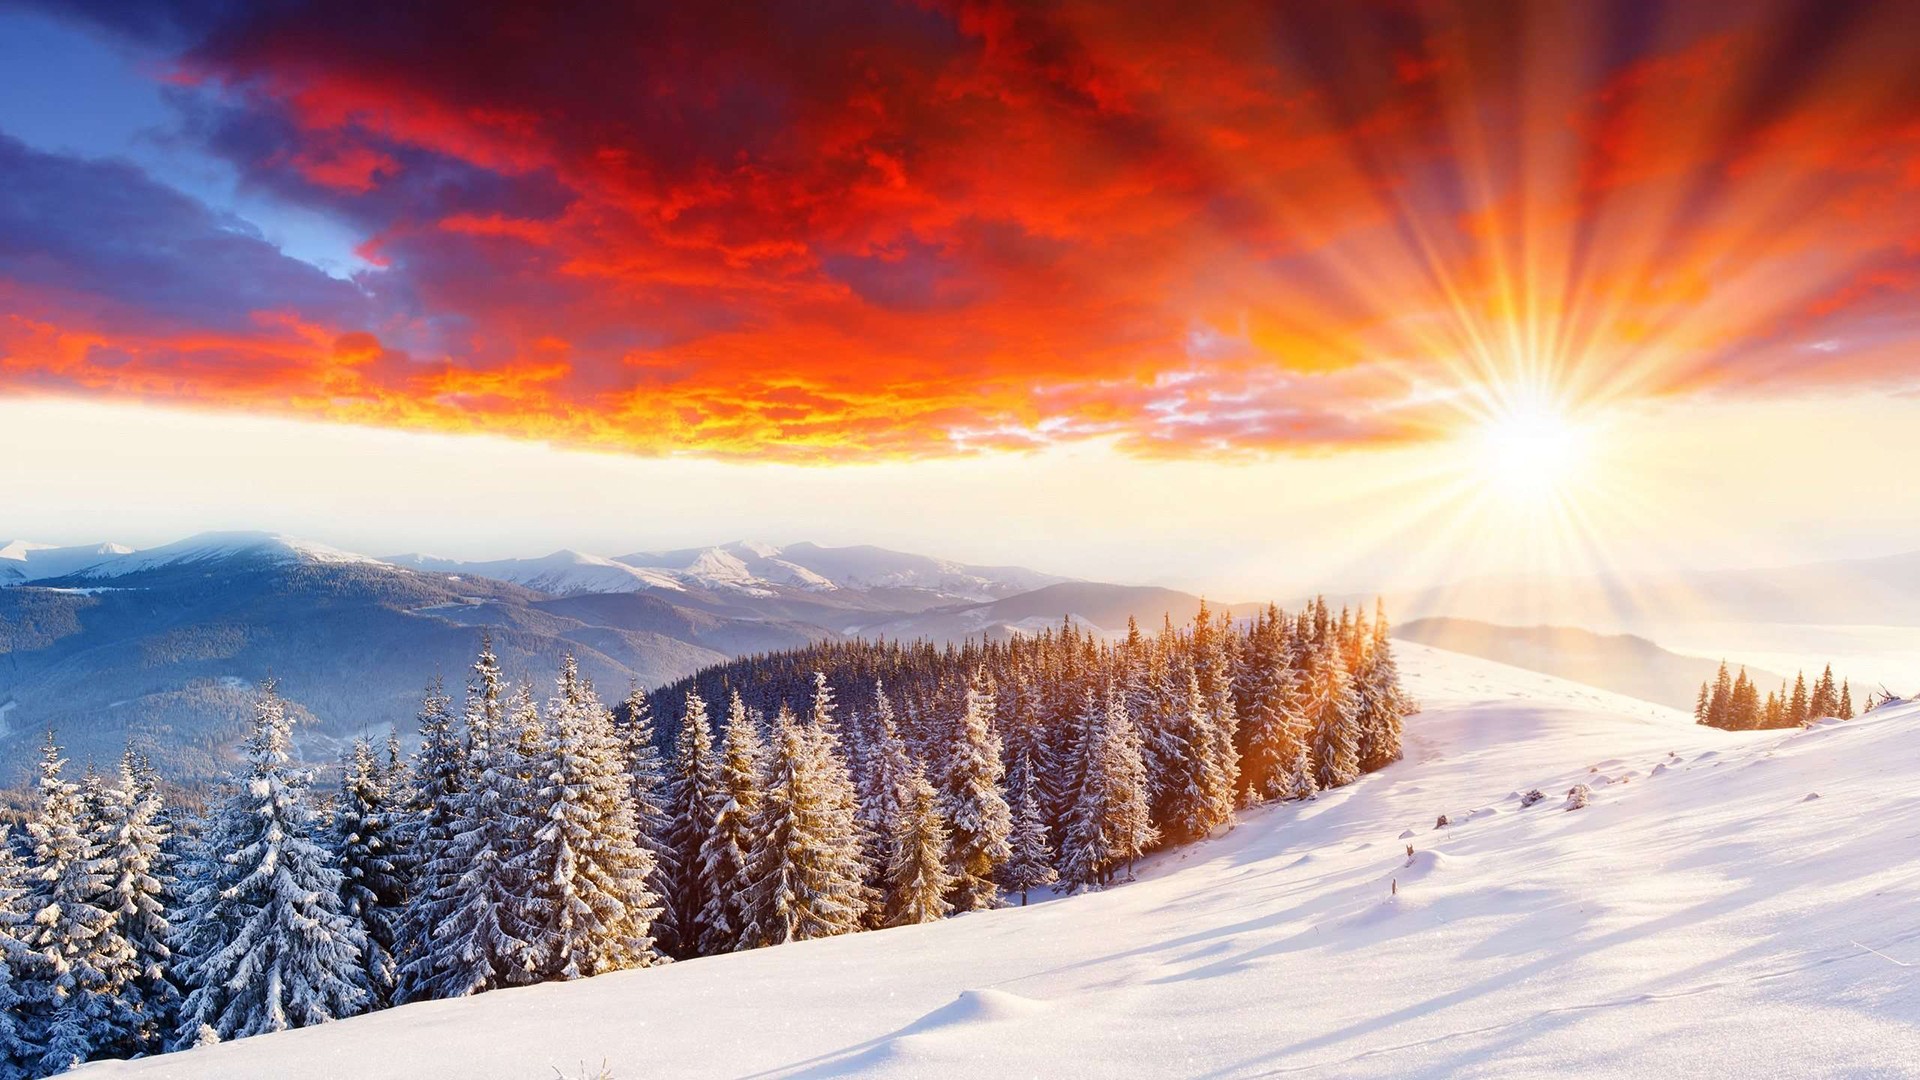 General 1920x1080 winter snow mountains nature